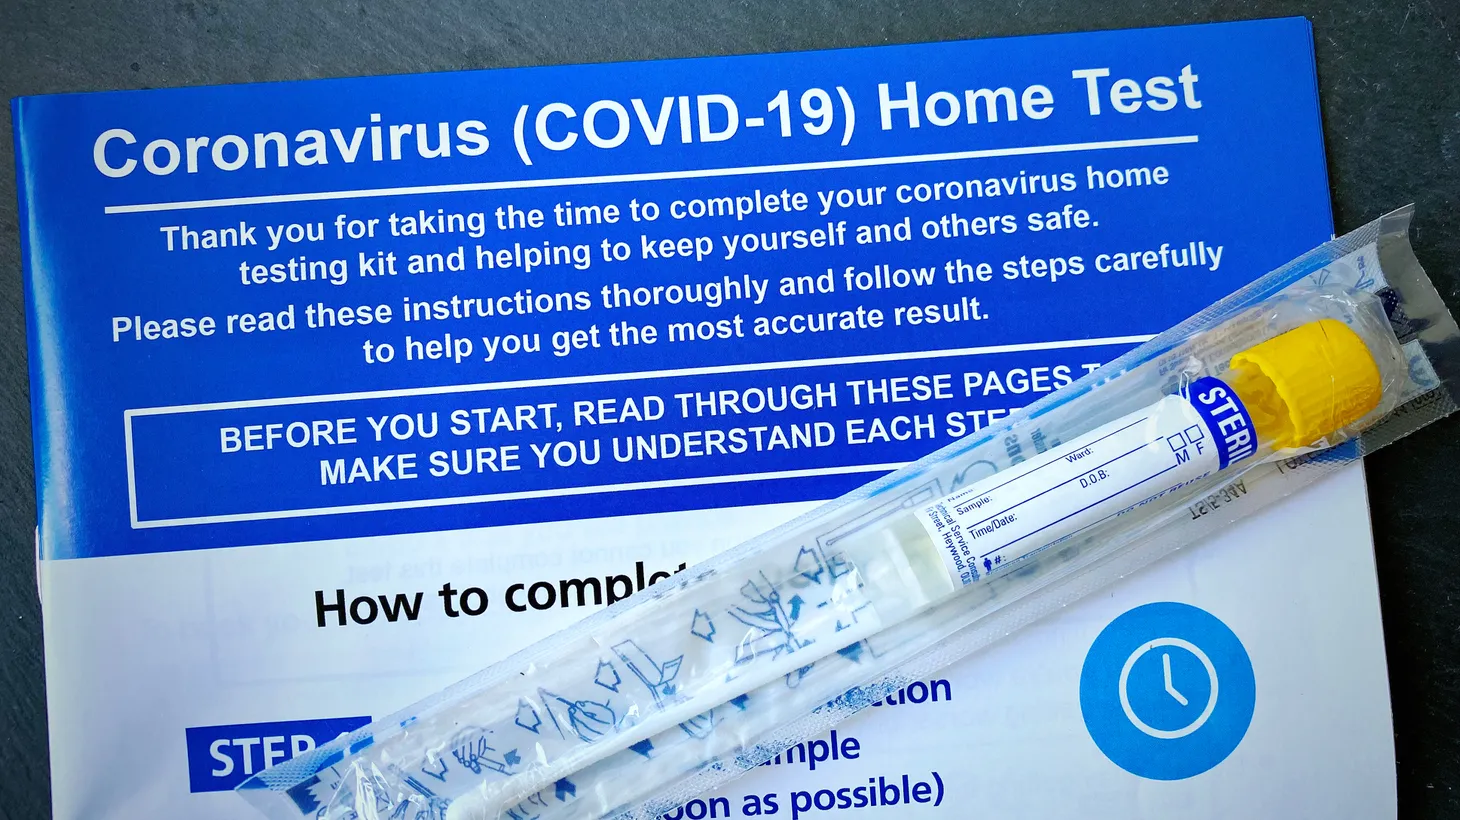 LA County is offering at-home test kits through the Pick-Up Testing Program and the Home Test Collection Program . You can also buy home kits from drugstores and pharmacies.